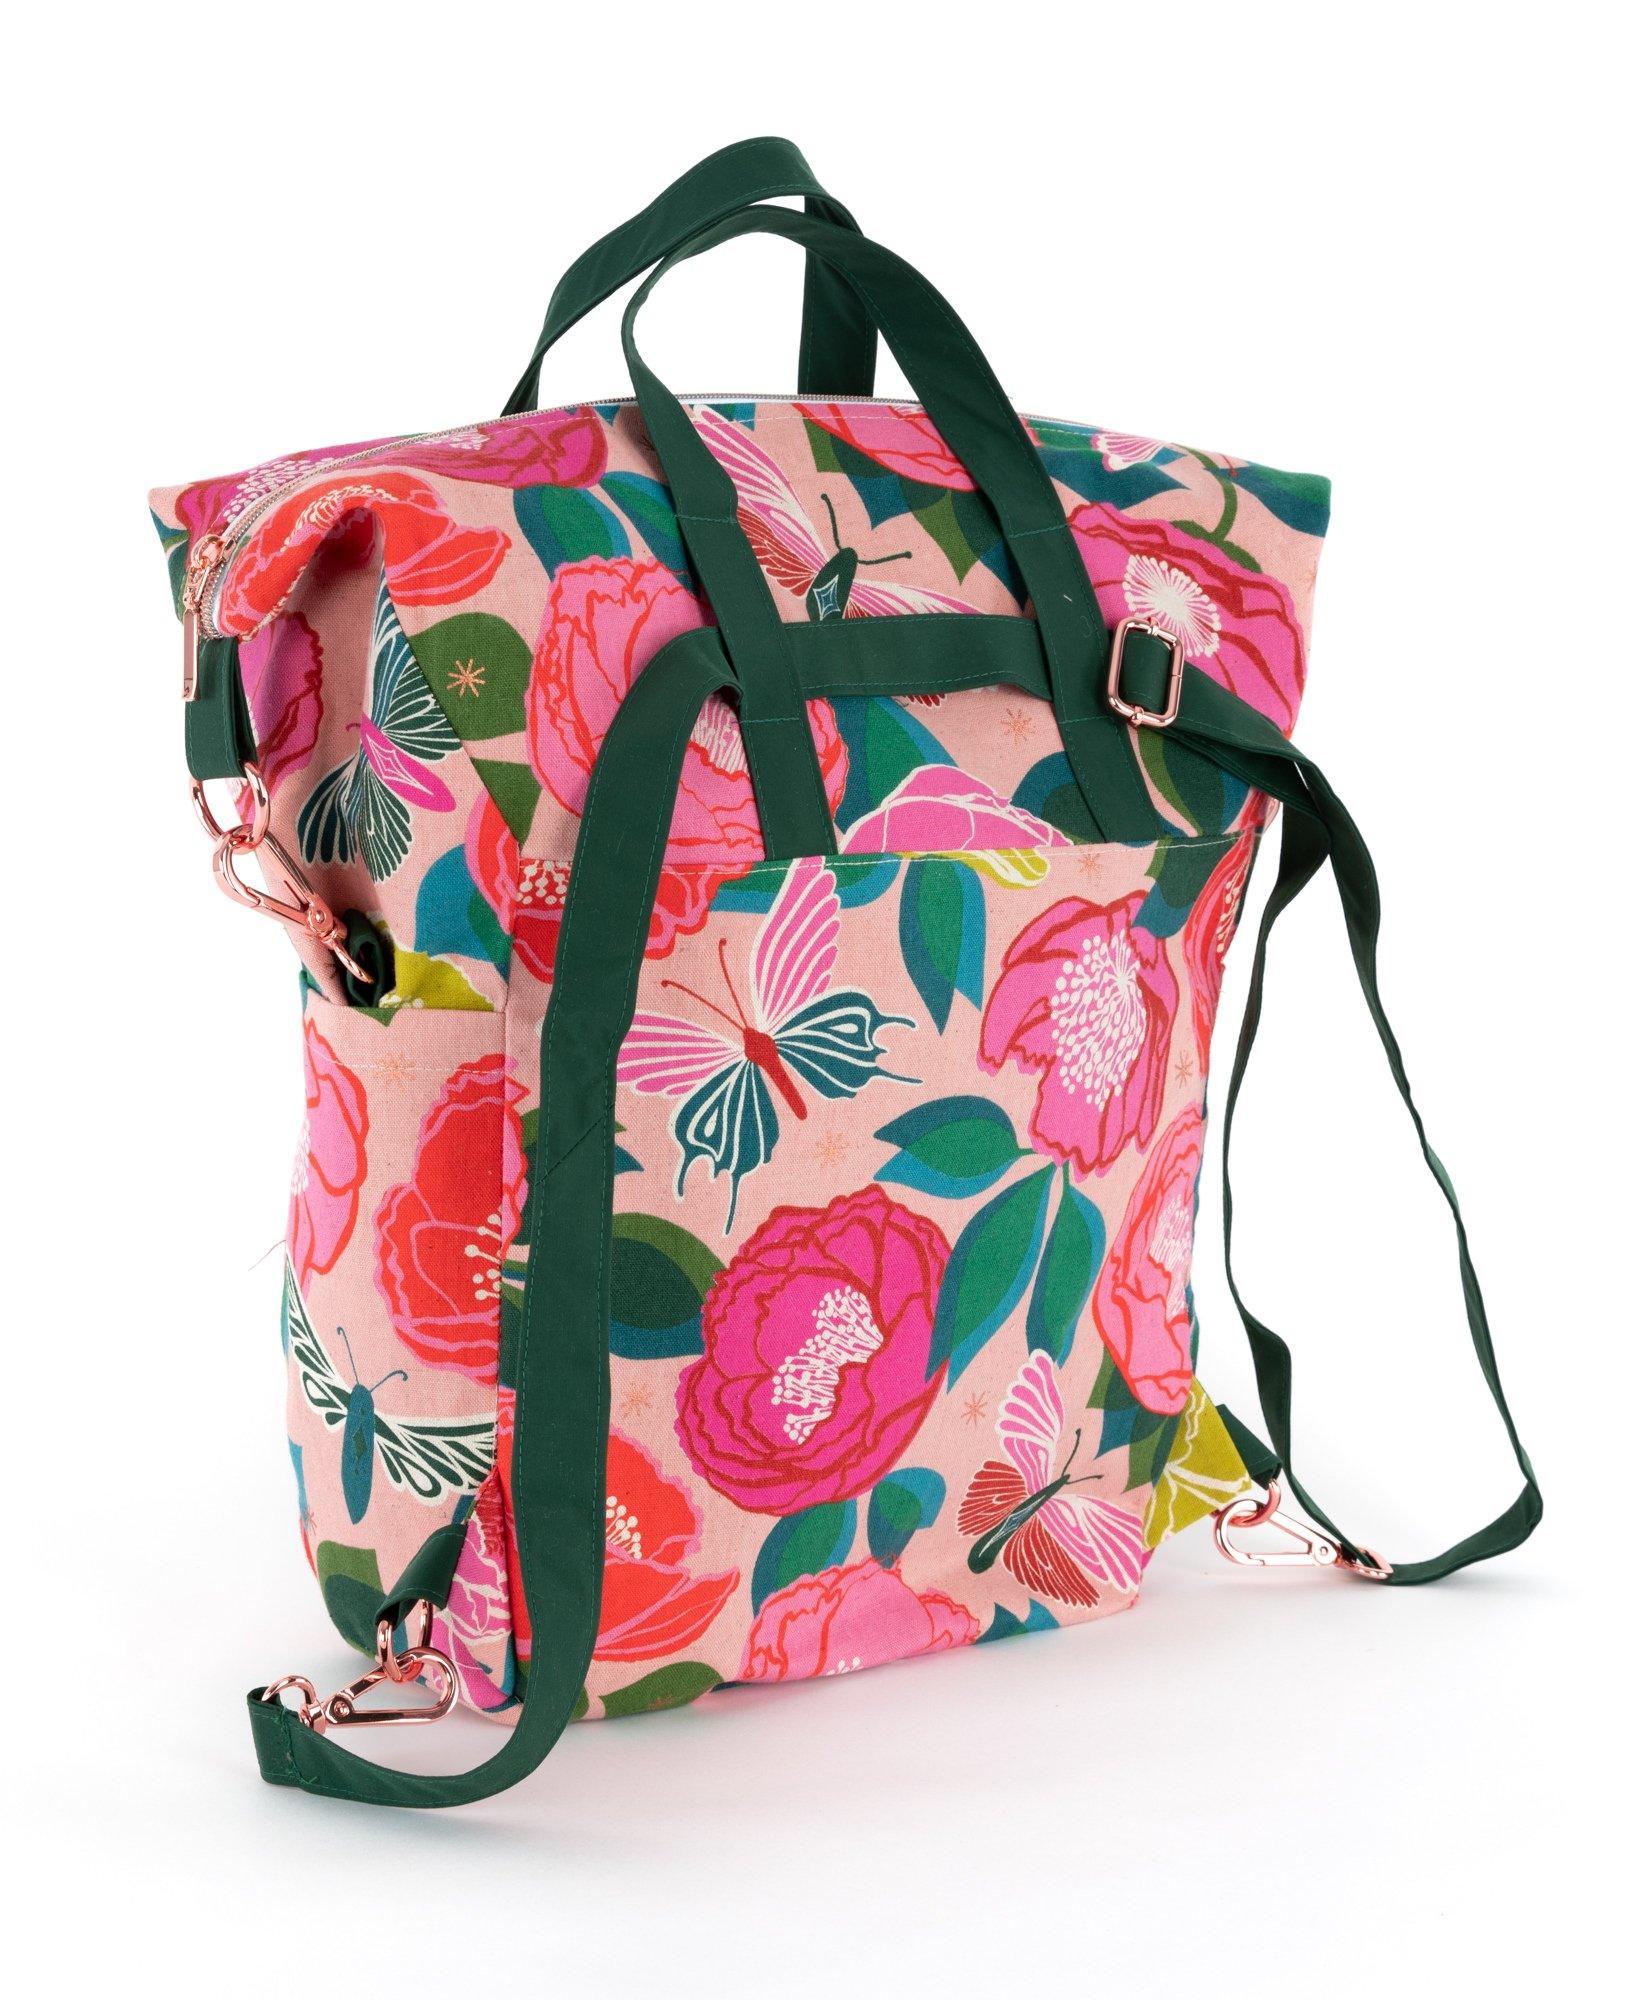 Convertible backpack made with Ruby Star Melody Miller canvas